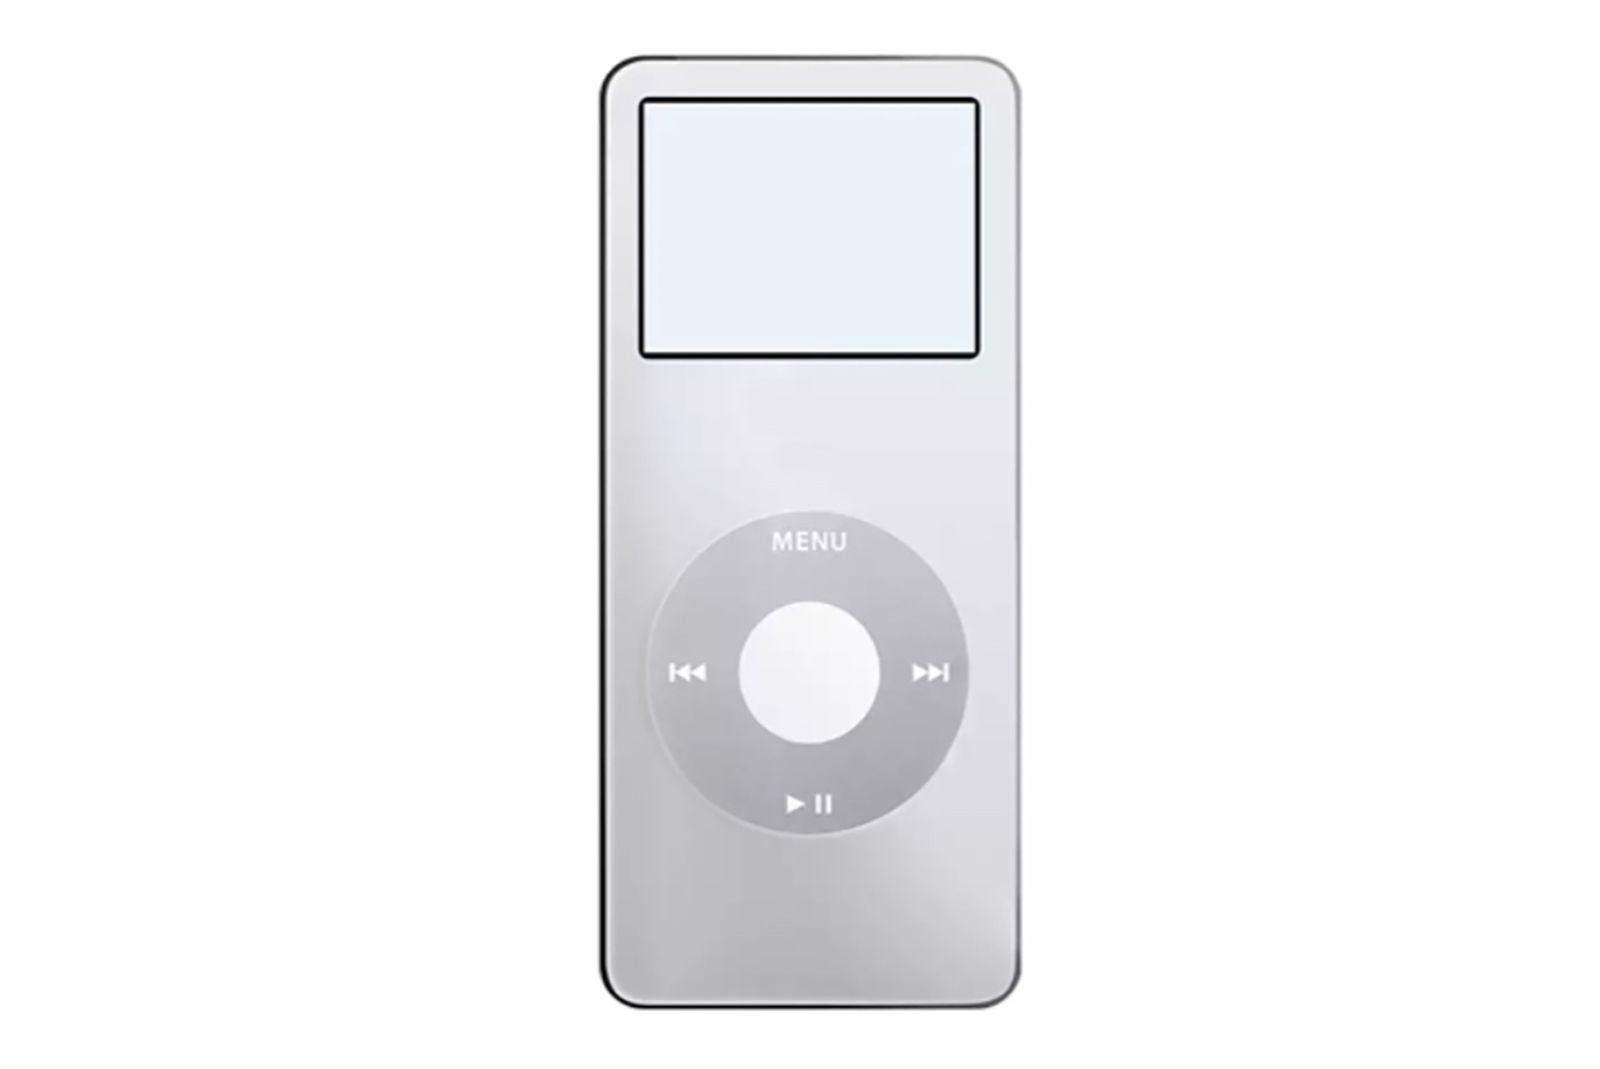 Every Apple iPod Model over the years (2001 to 2022) photo 7